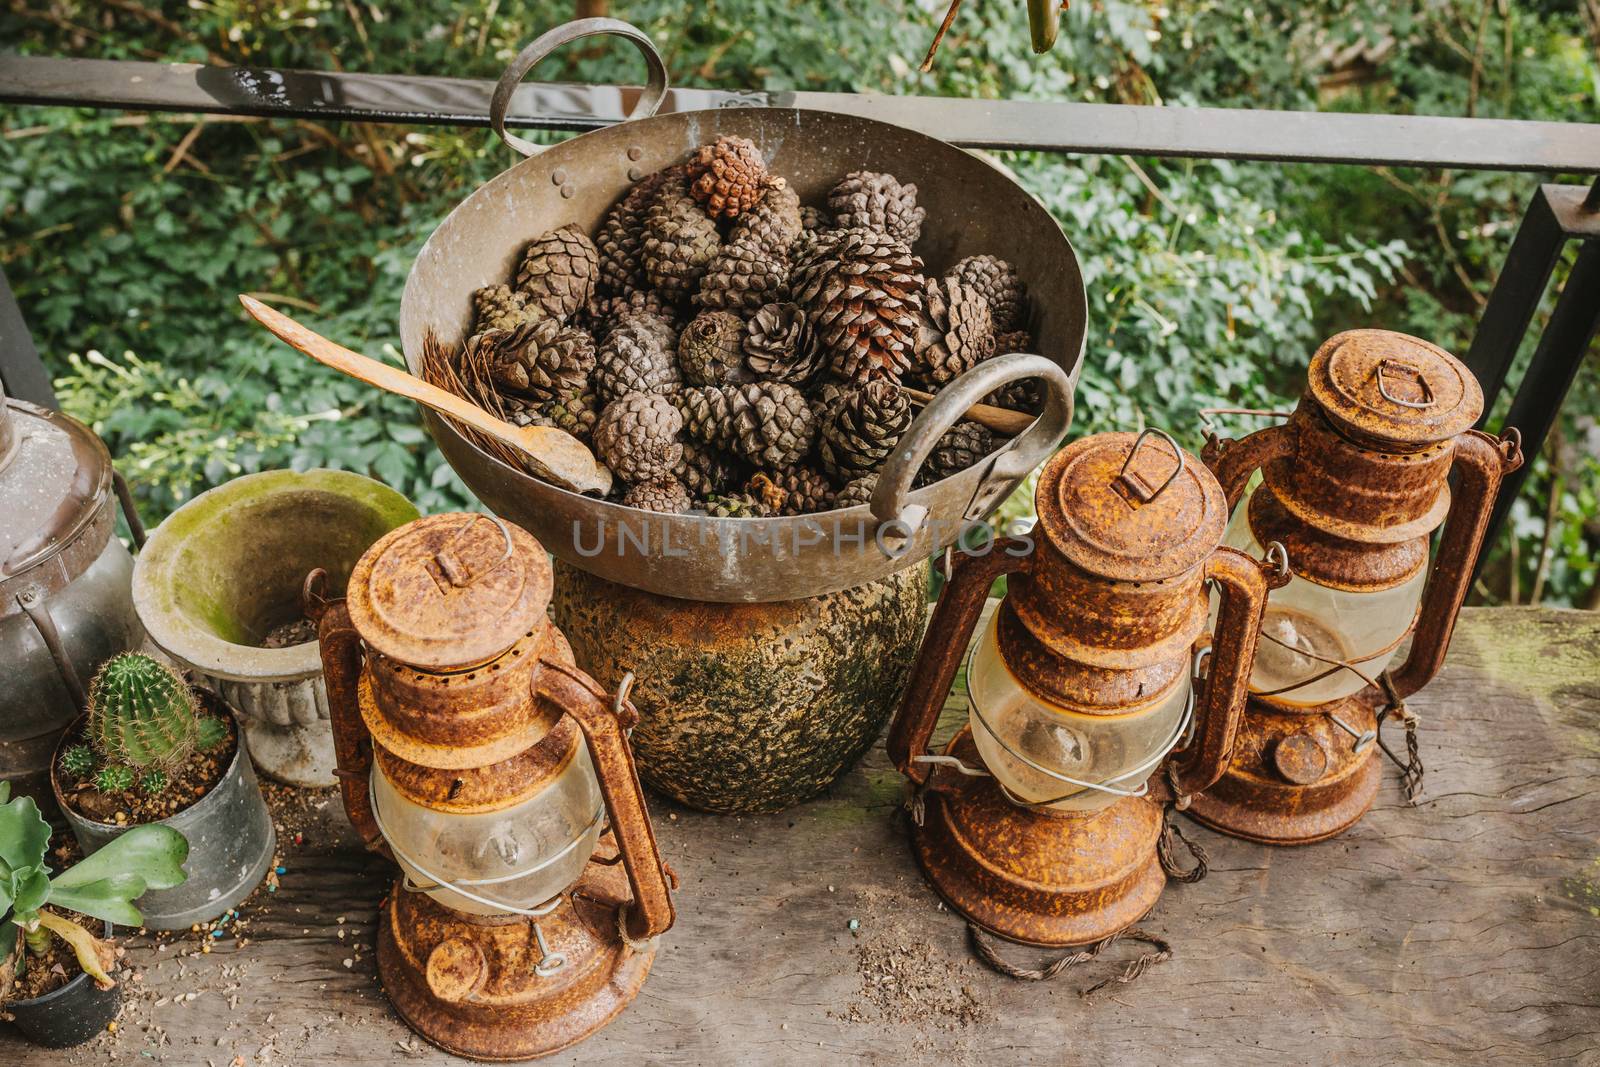 Pine cones in a rusty iron pan Ideas to decorate vintage style by nopparats